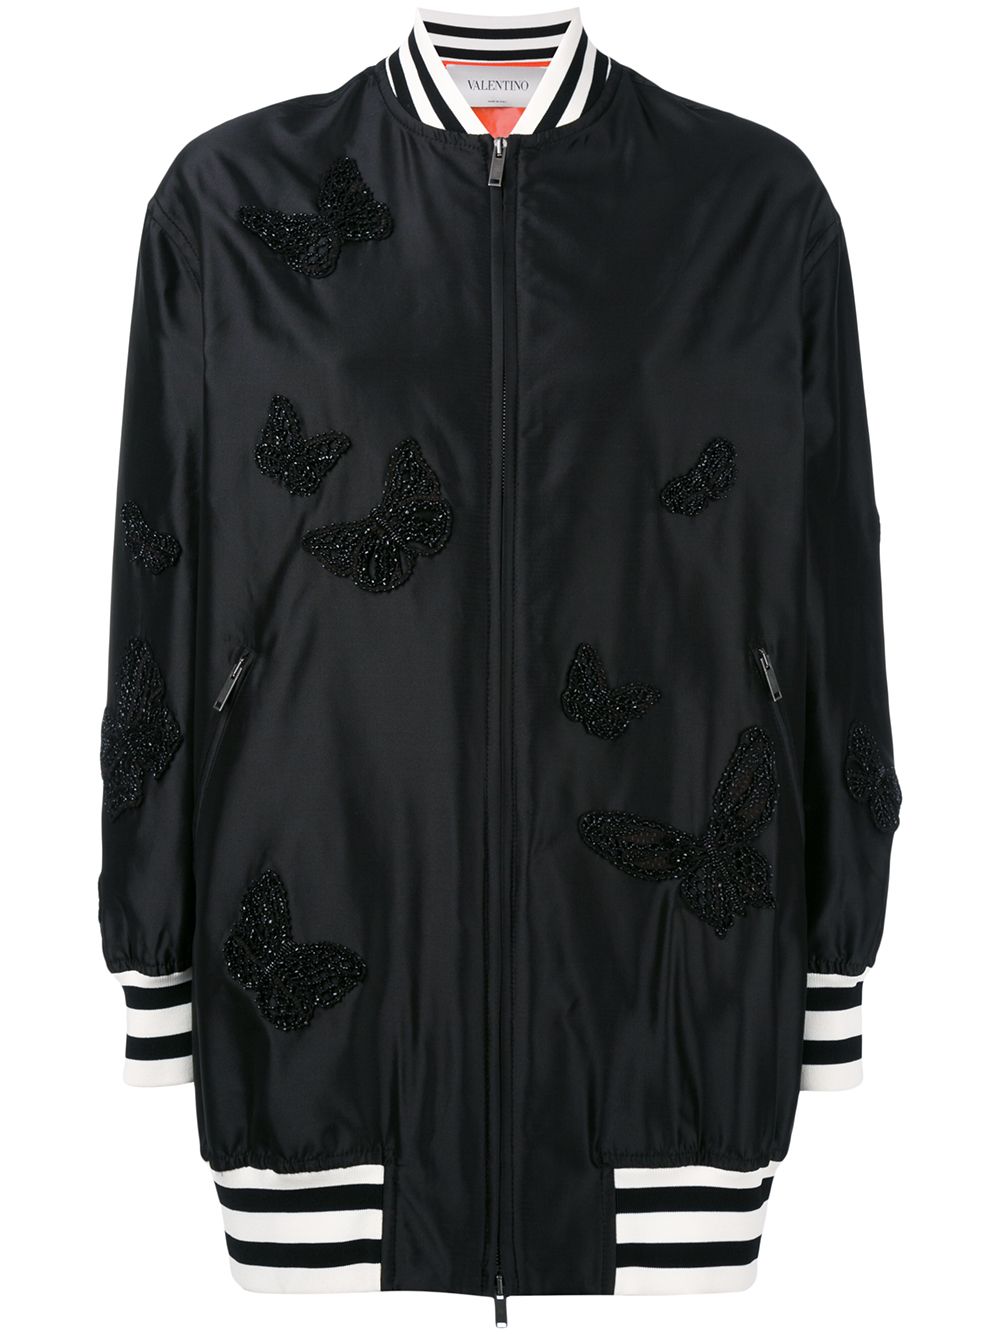 Officer behandle frokost Valentino Garavani Butterfly Embroidered Bomber Jacket - Farfetch